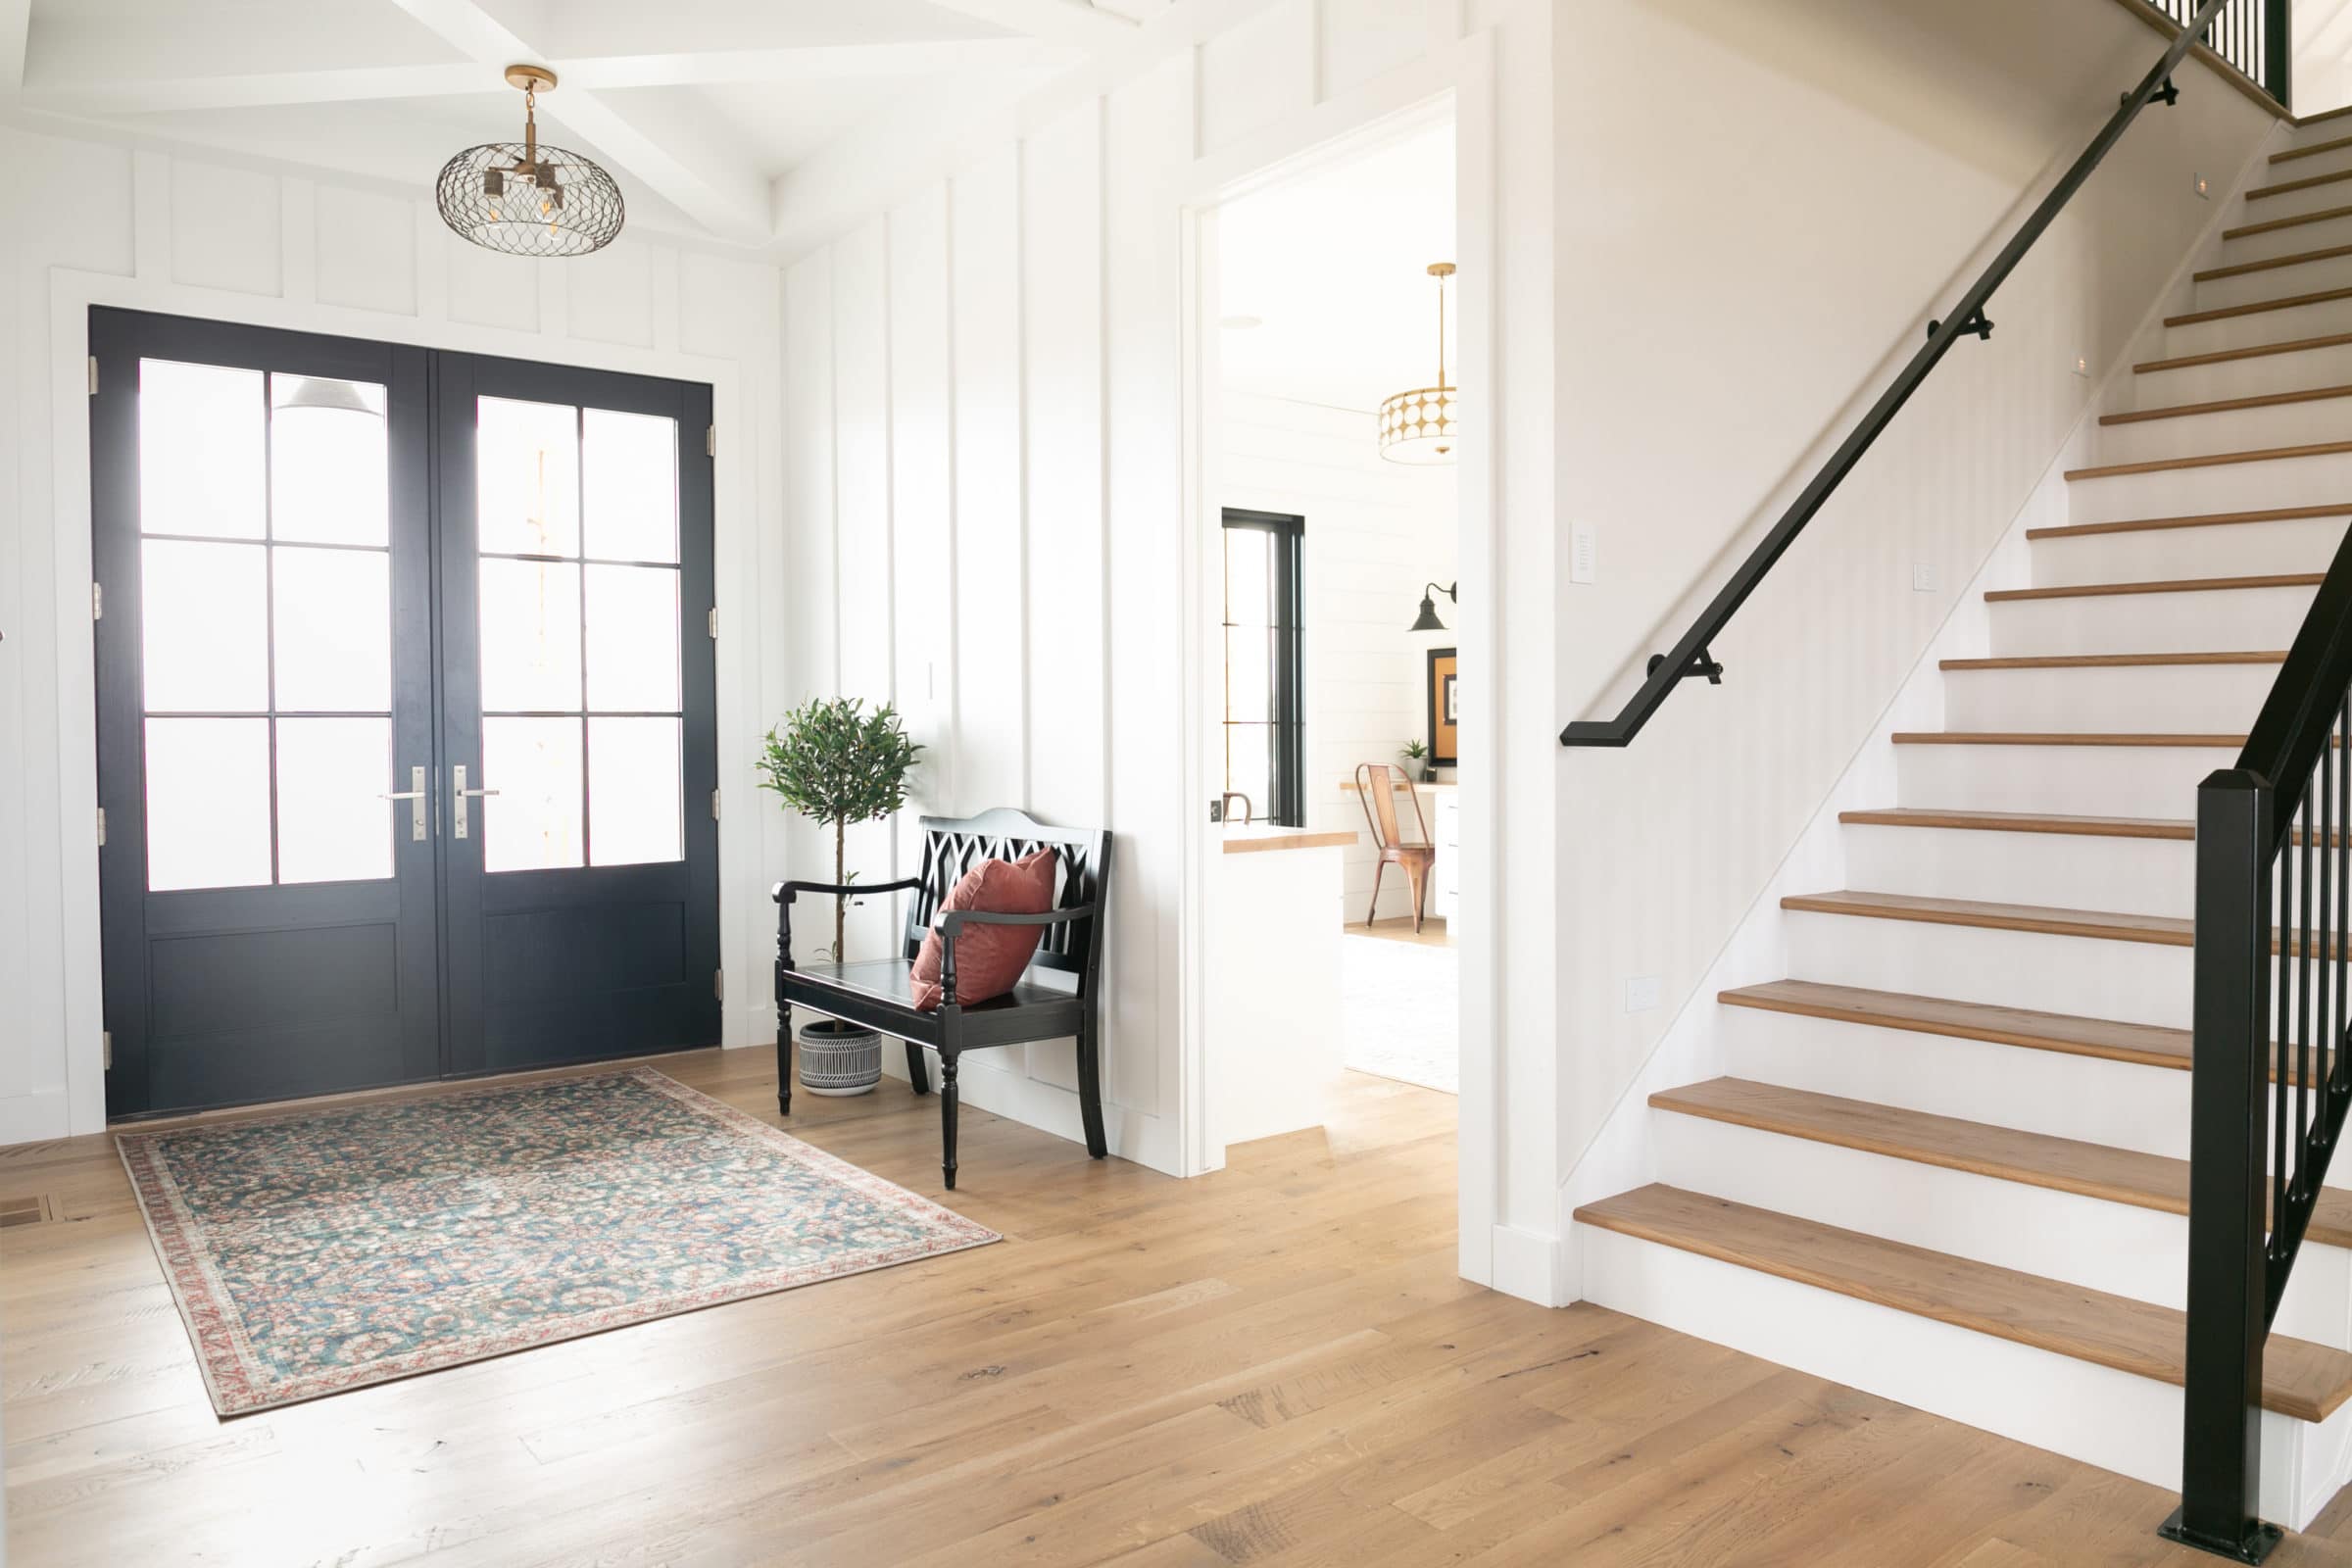 The Best White Paint Colors For Trim